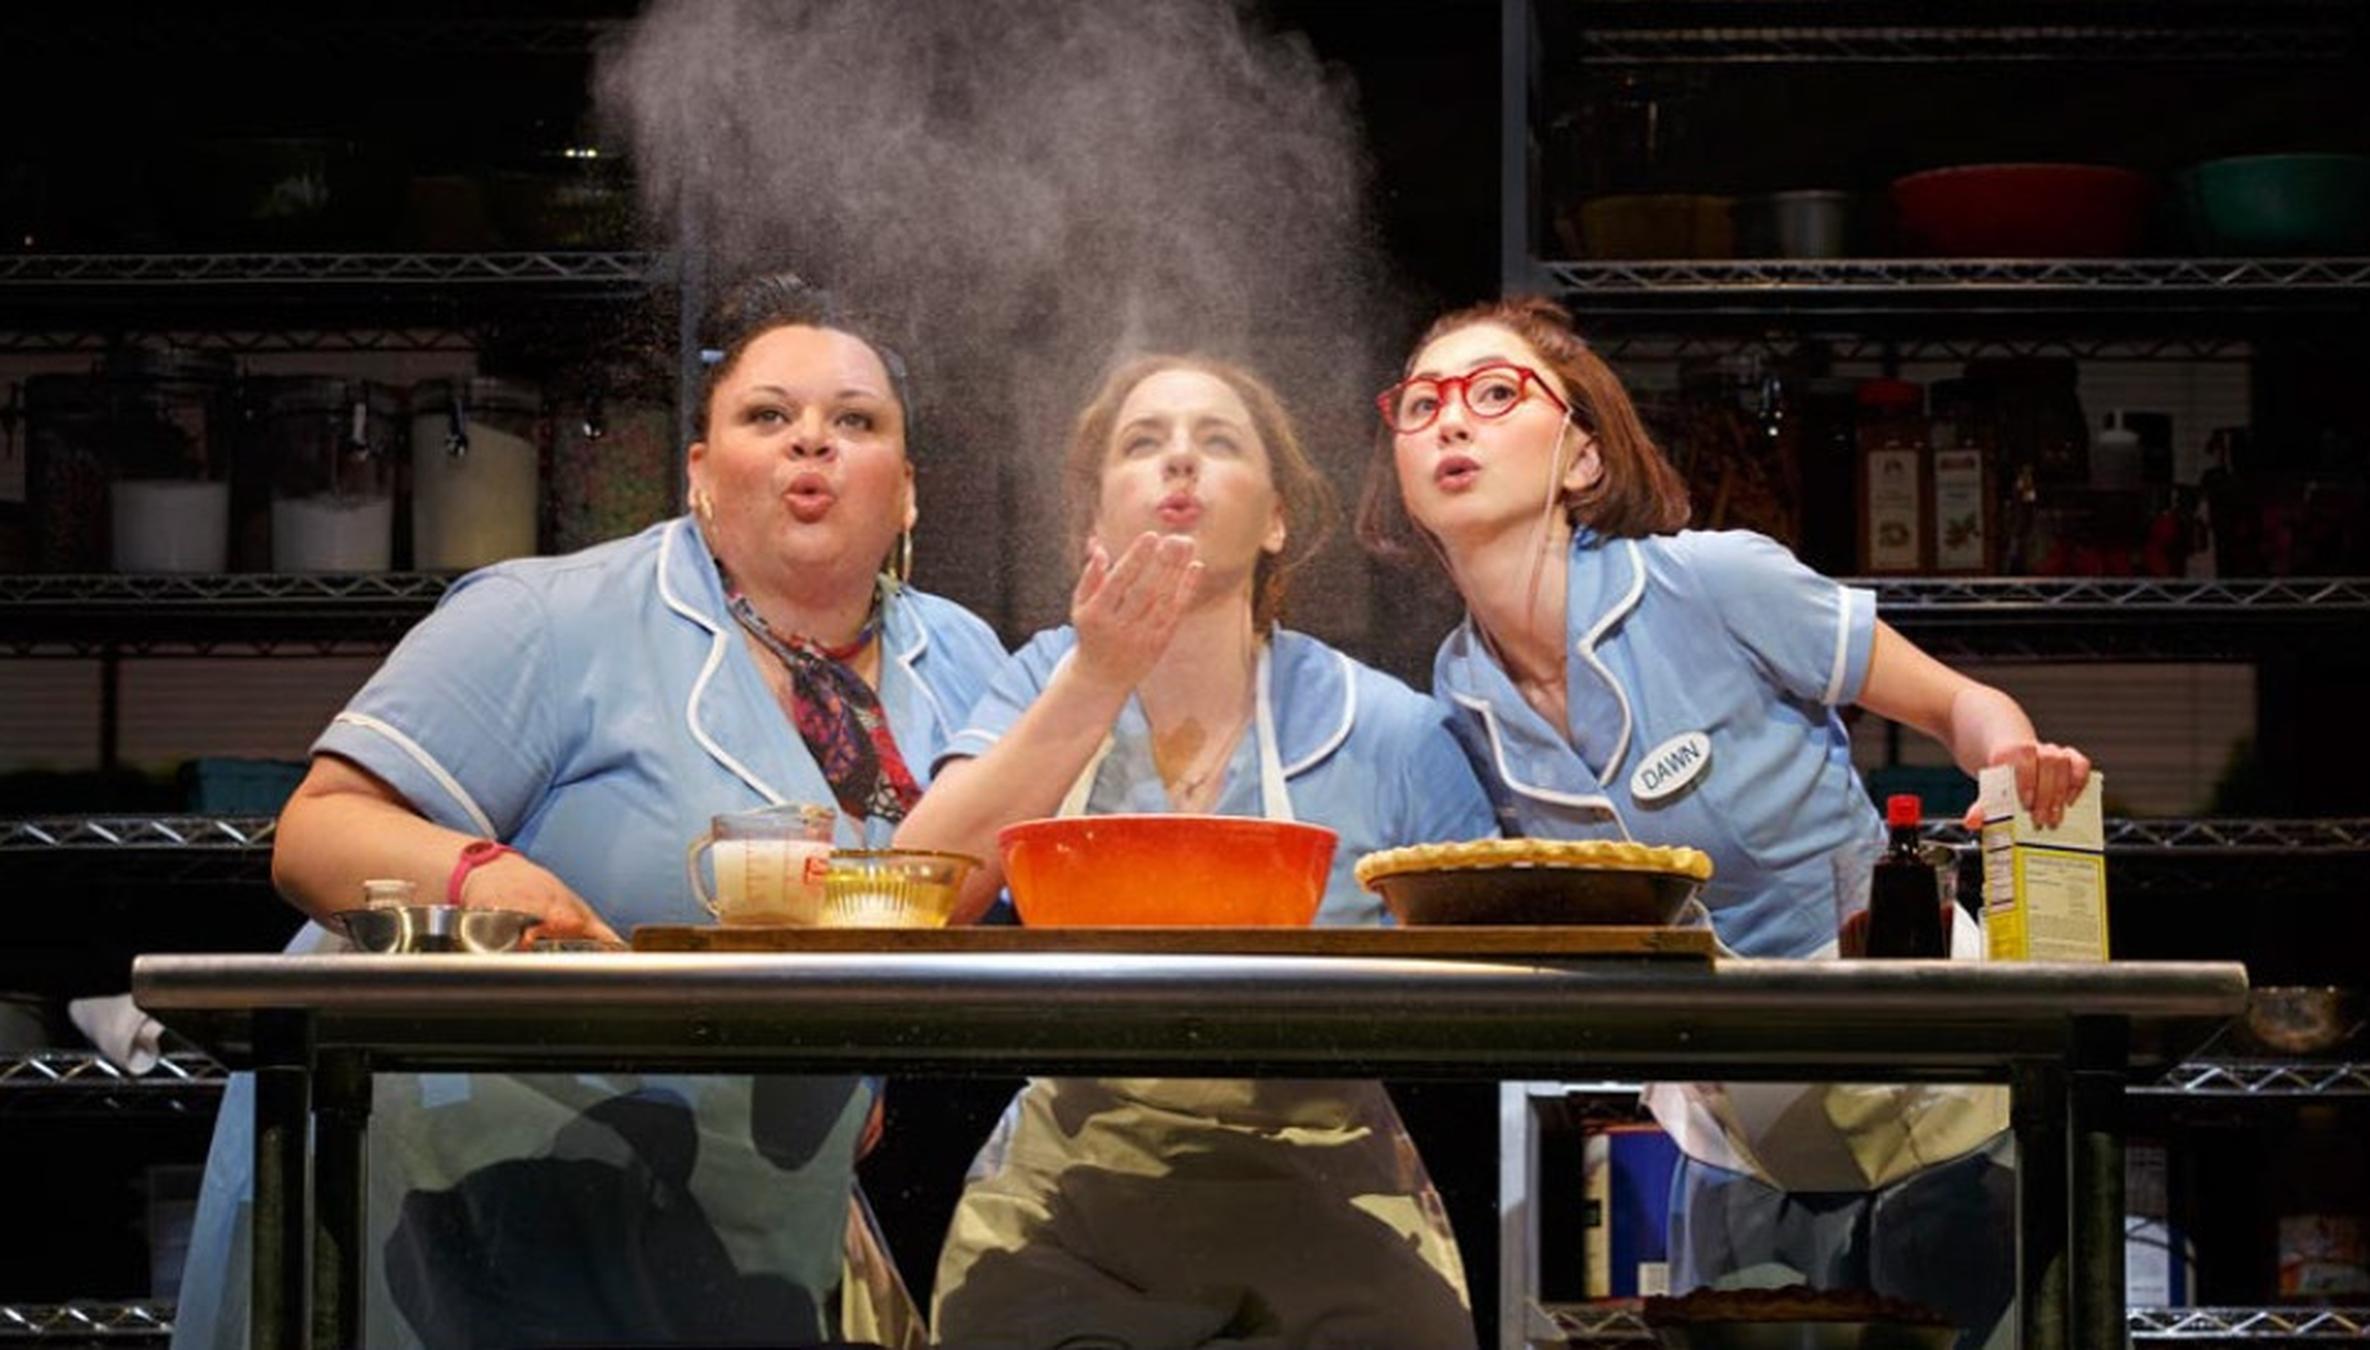 ‘Waitress’ Screening Will Feature Performance By Bway Cast + More NYC